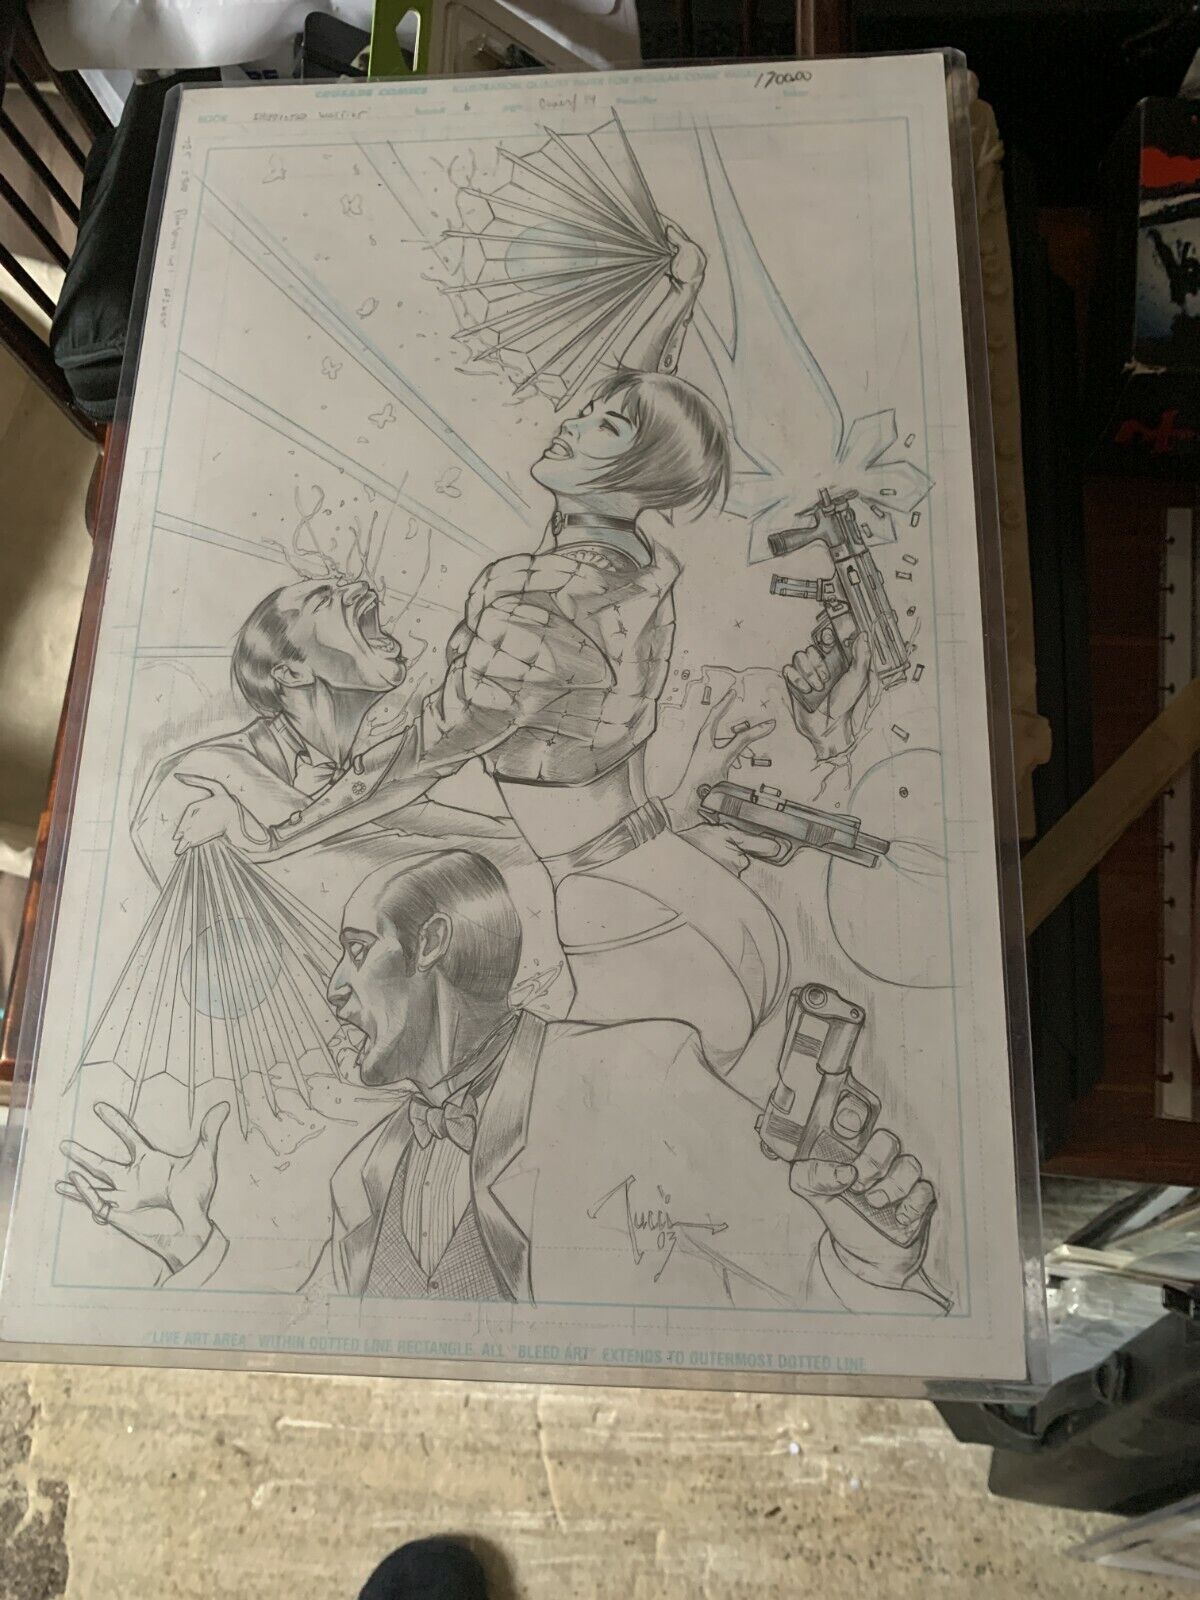 Original art for published cover of SHI Illustrated Warrior #6 by Billy Tucci